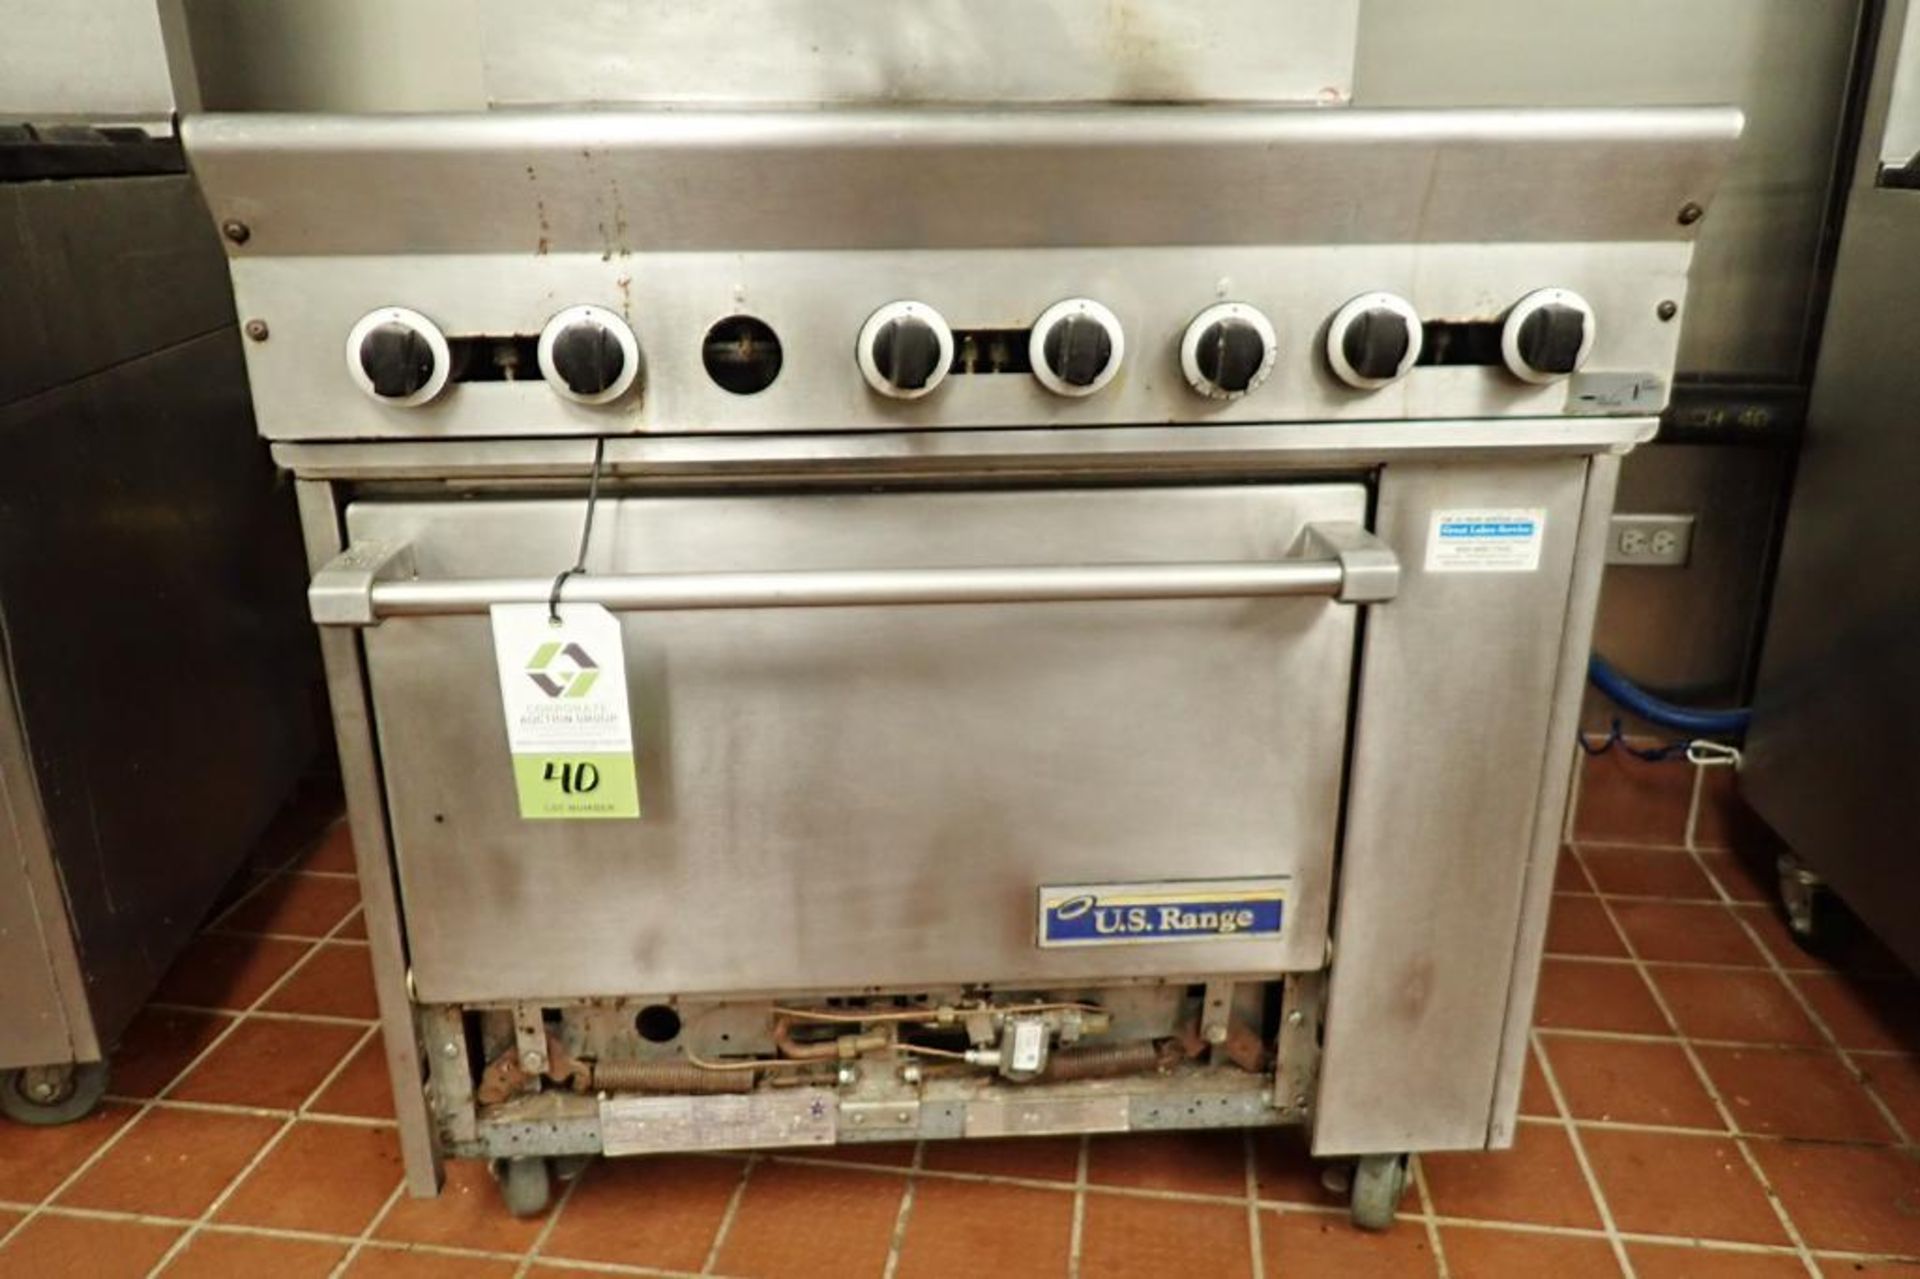 US Range six burner standard oven, Model PX-6-26CP, natural gas, 36 in. wide x 33 in. deep x 60 in t - Image 2 of 6